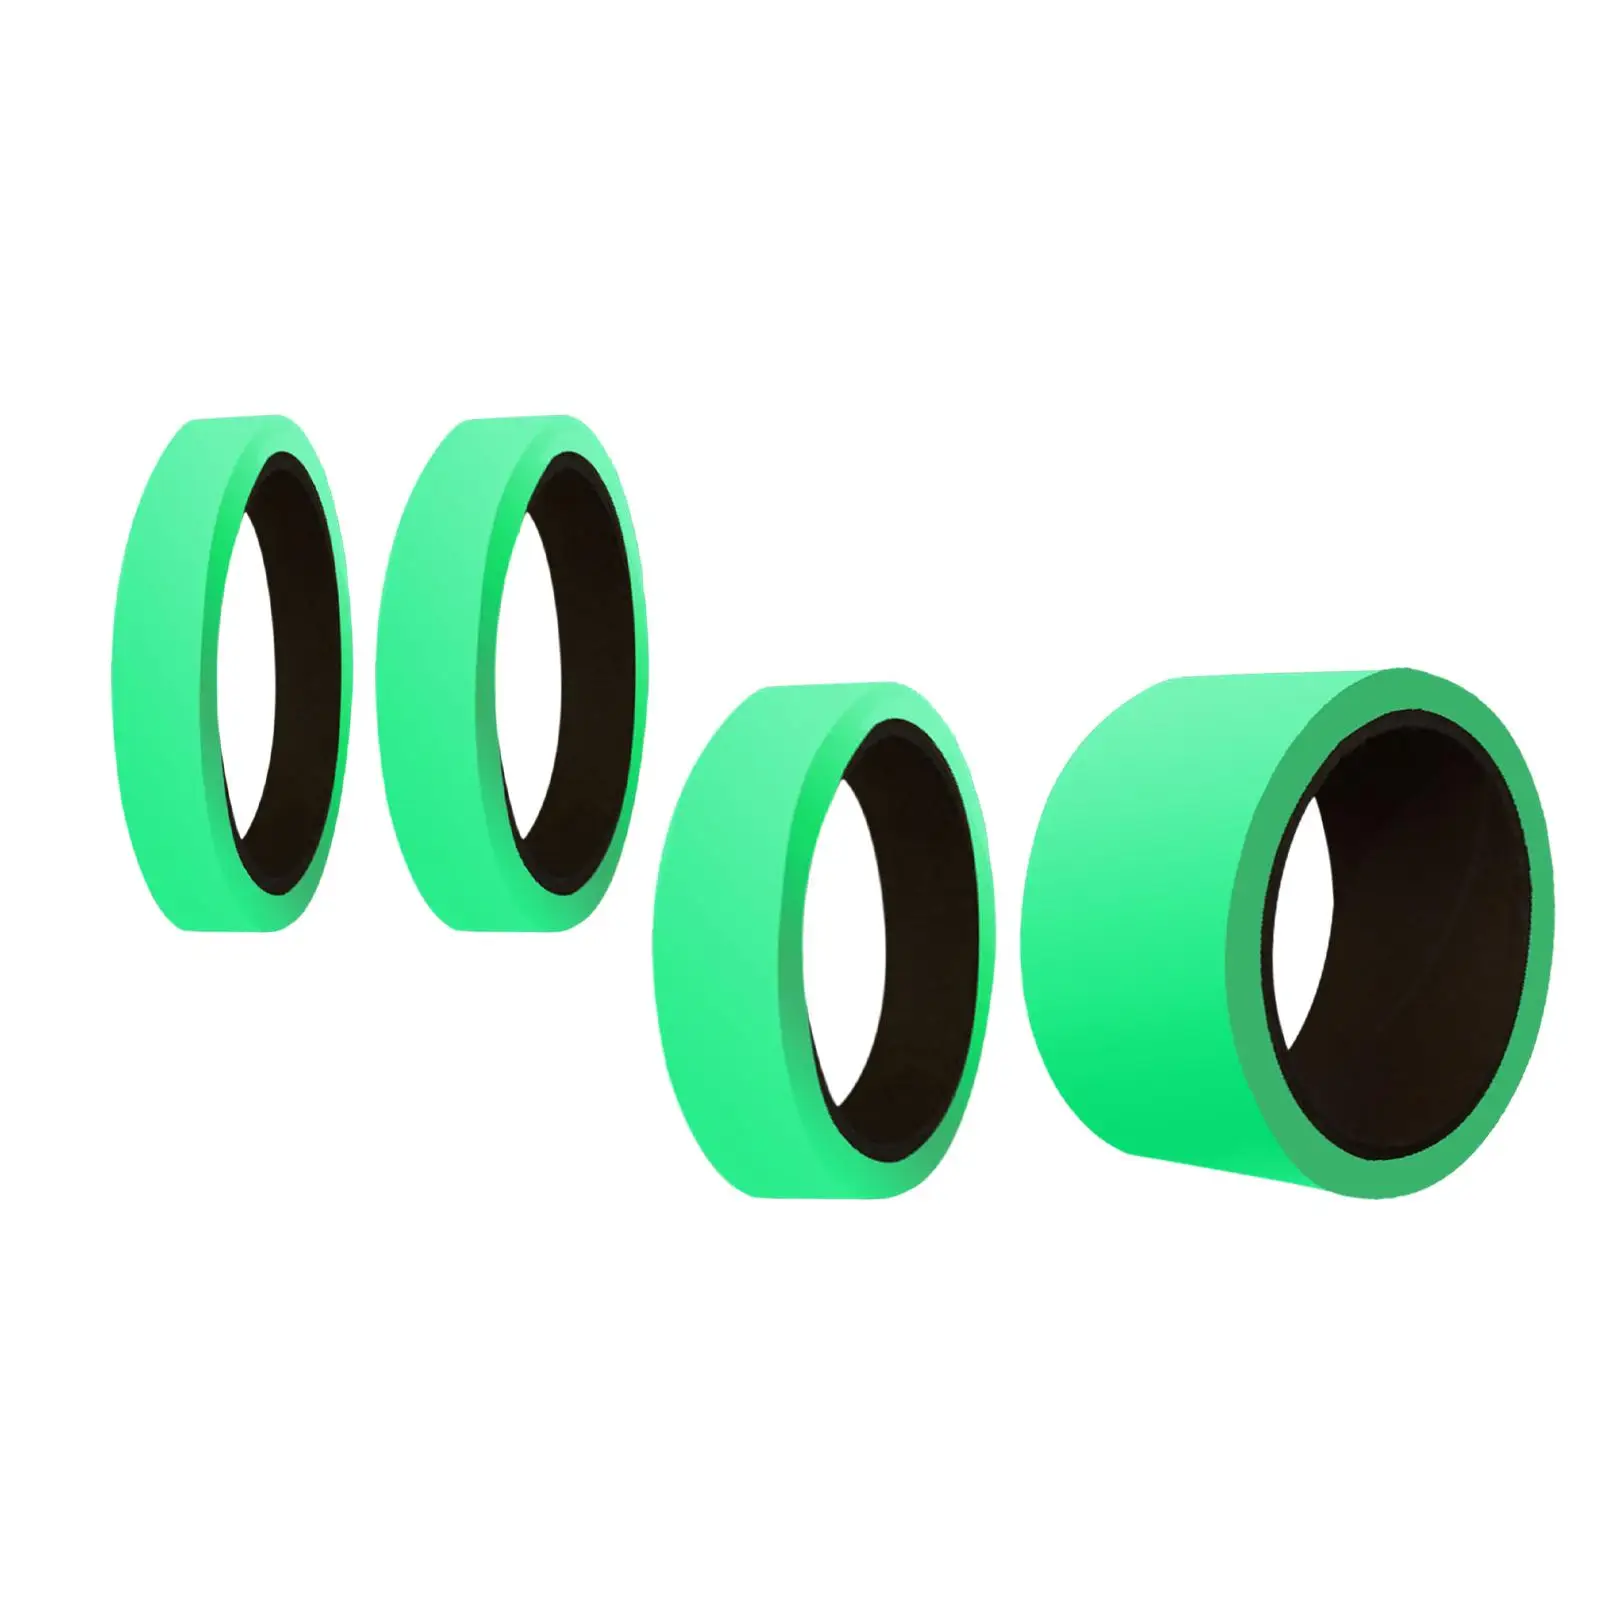 Glow in The Dark Tape Multifunctional Removable Luminous Tape for Emergency Exit Night Decorations Theater Stage Halloween Walls